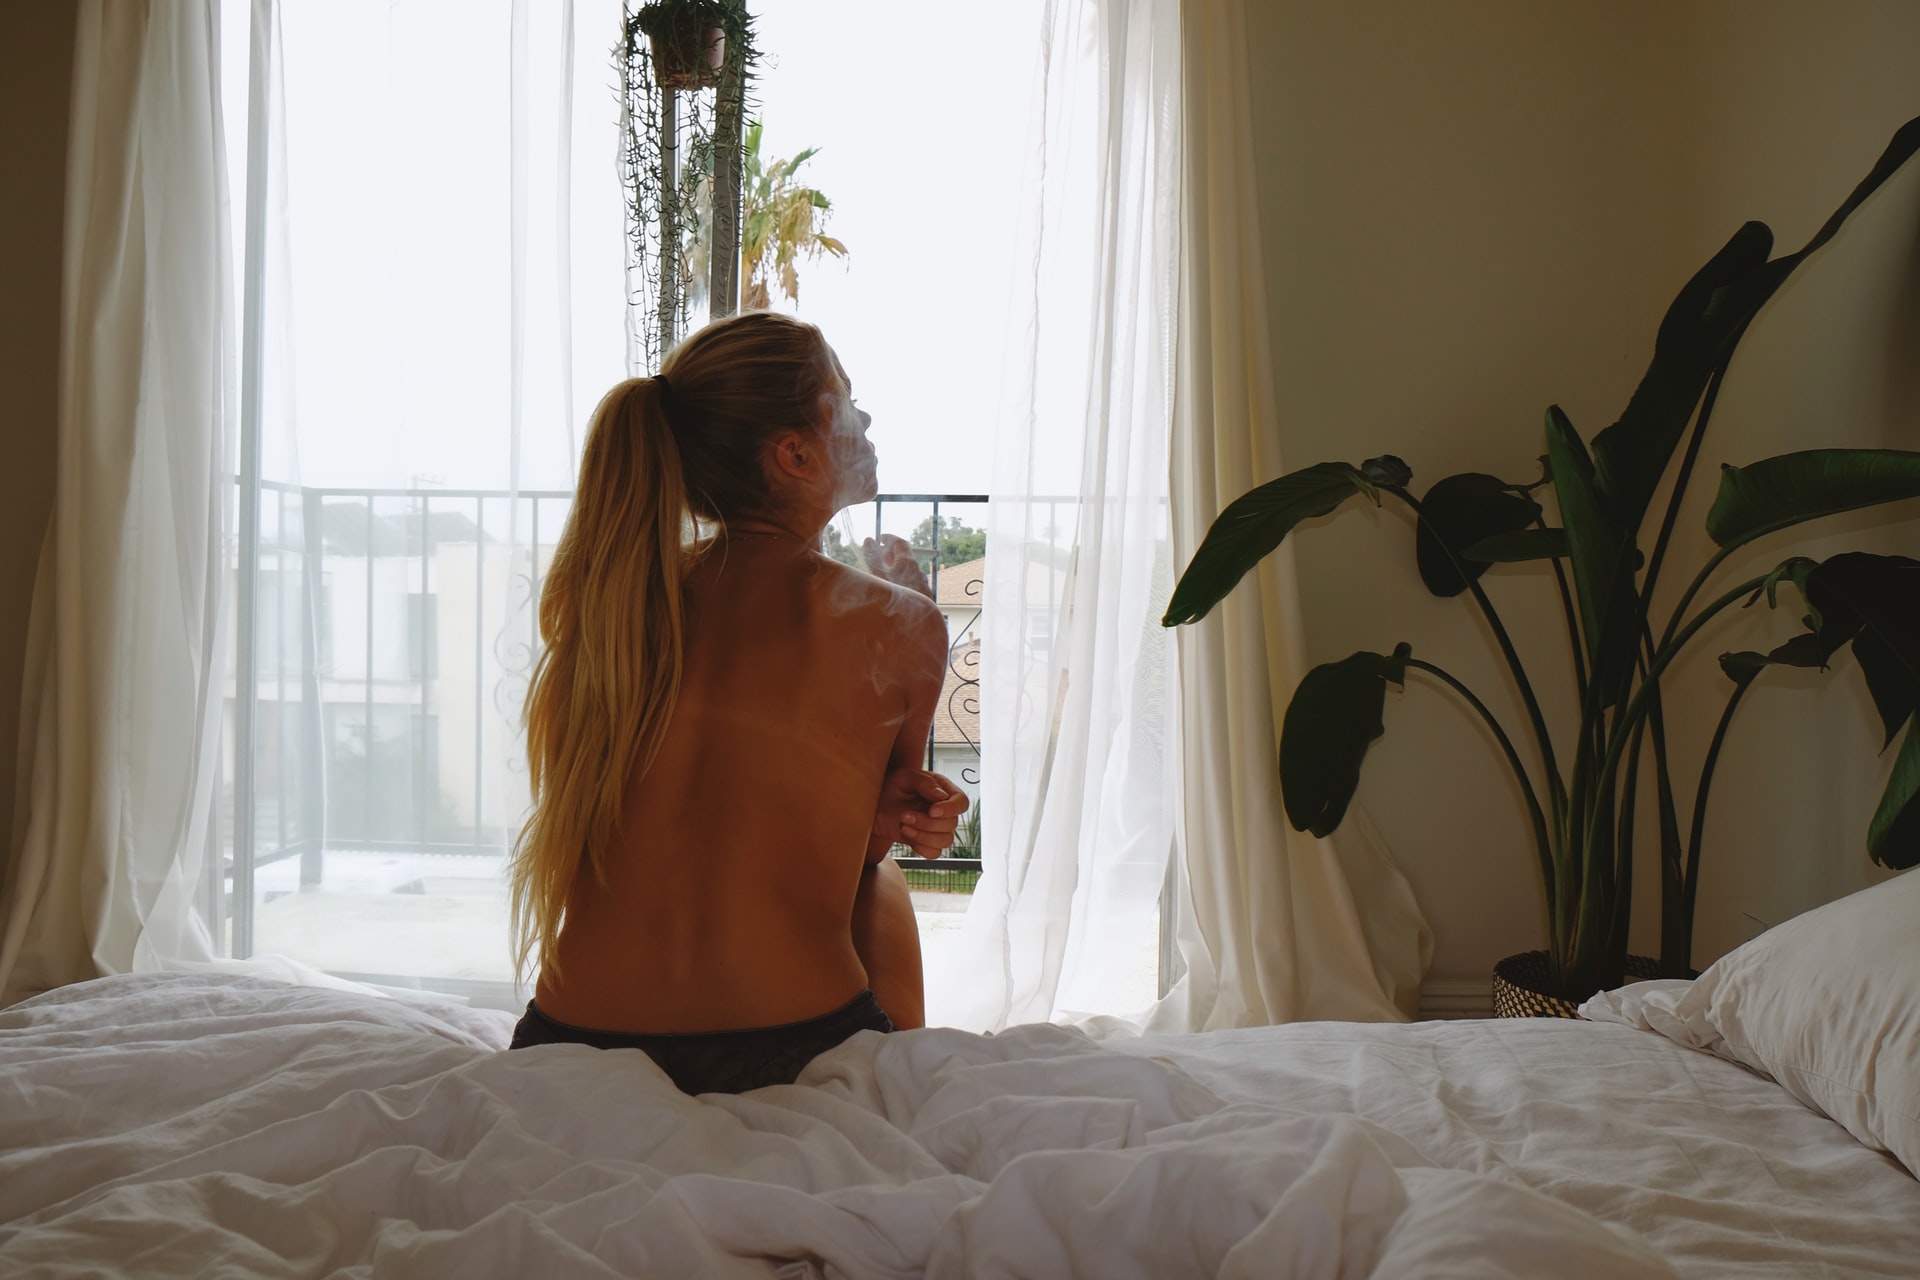 Blonde semi-naked woman sits on bed smoking in front of balcony